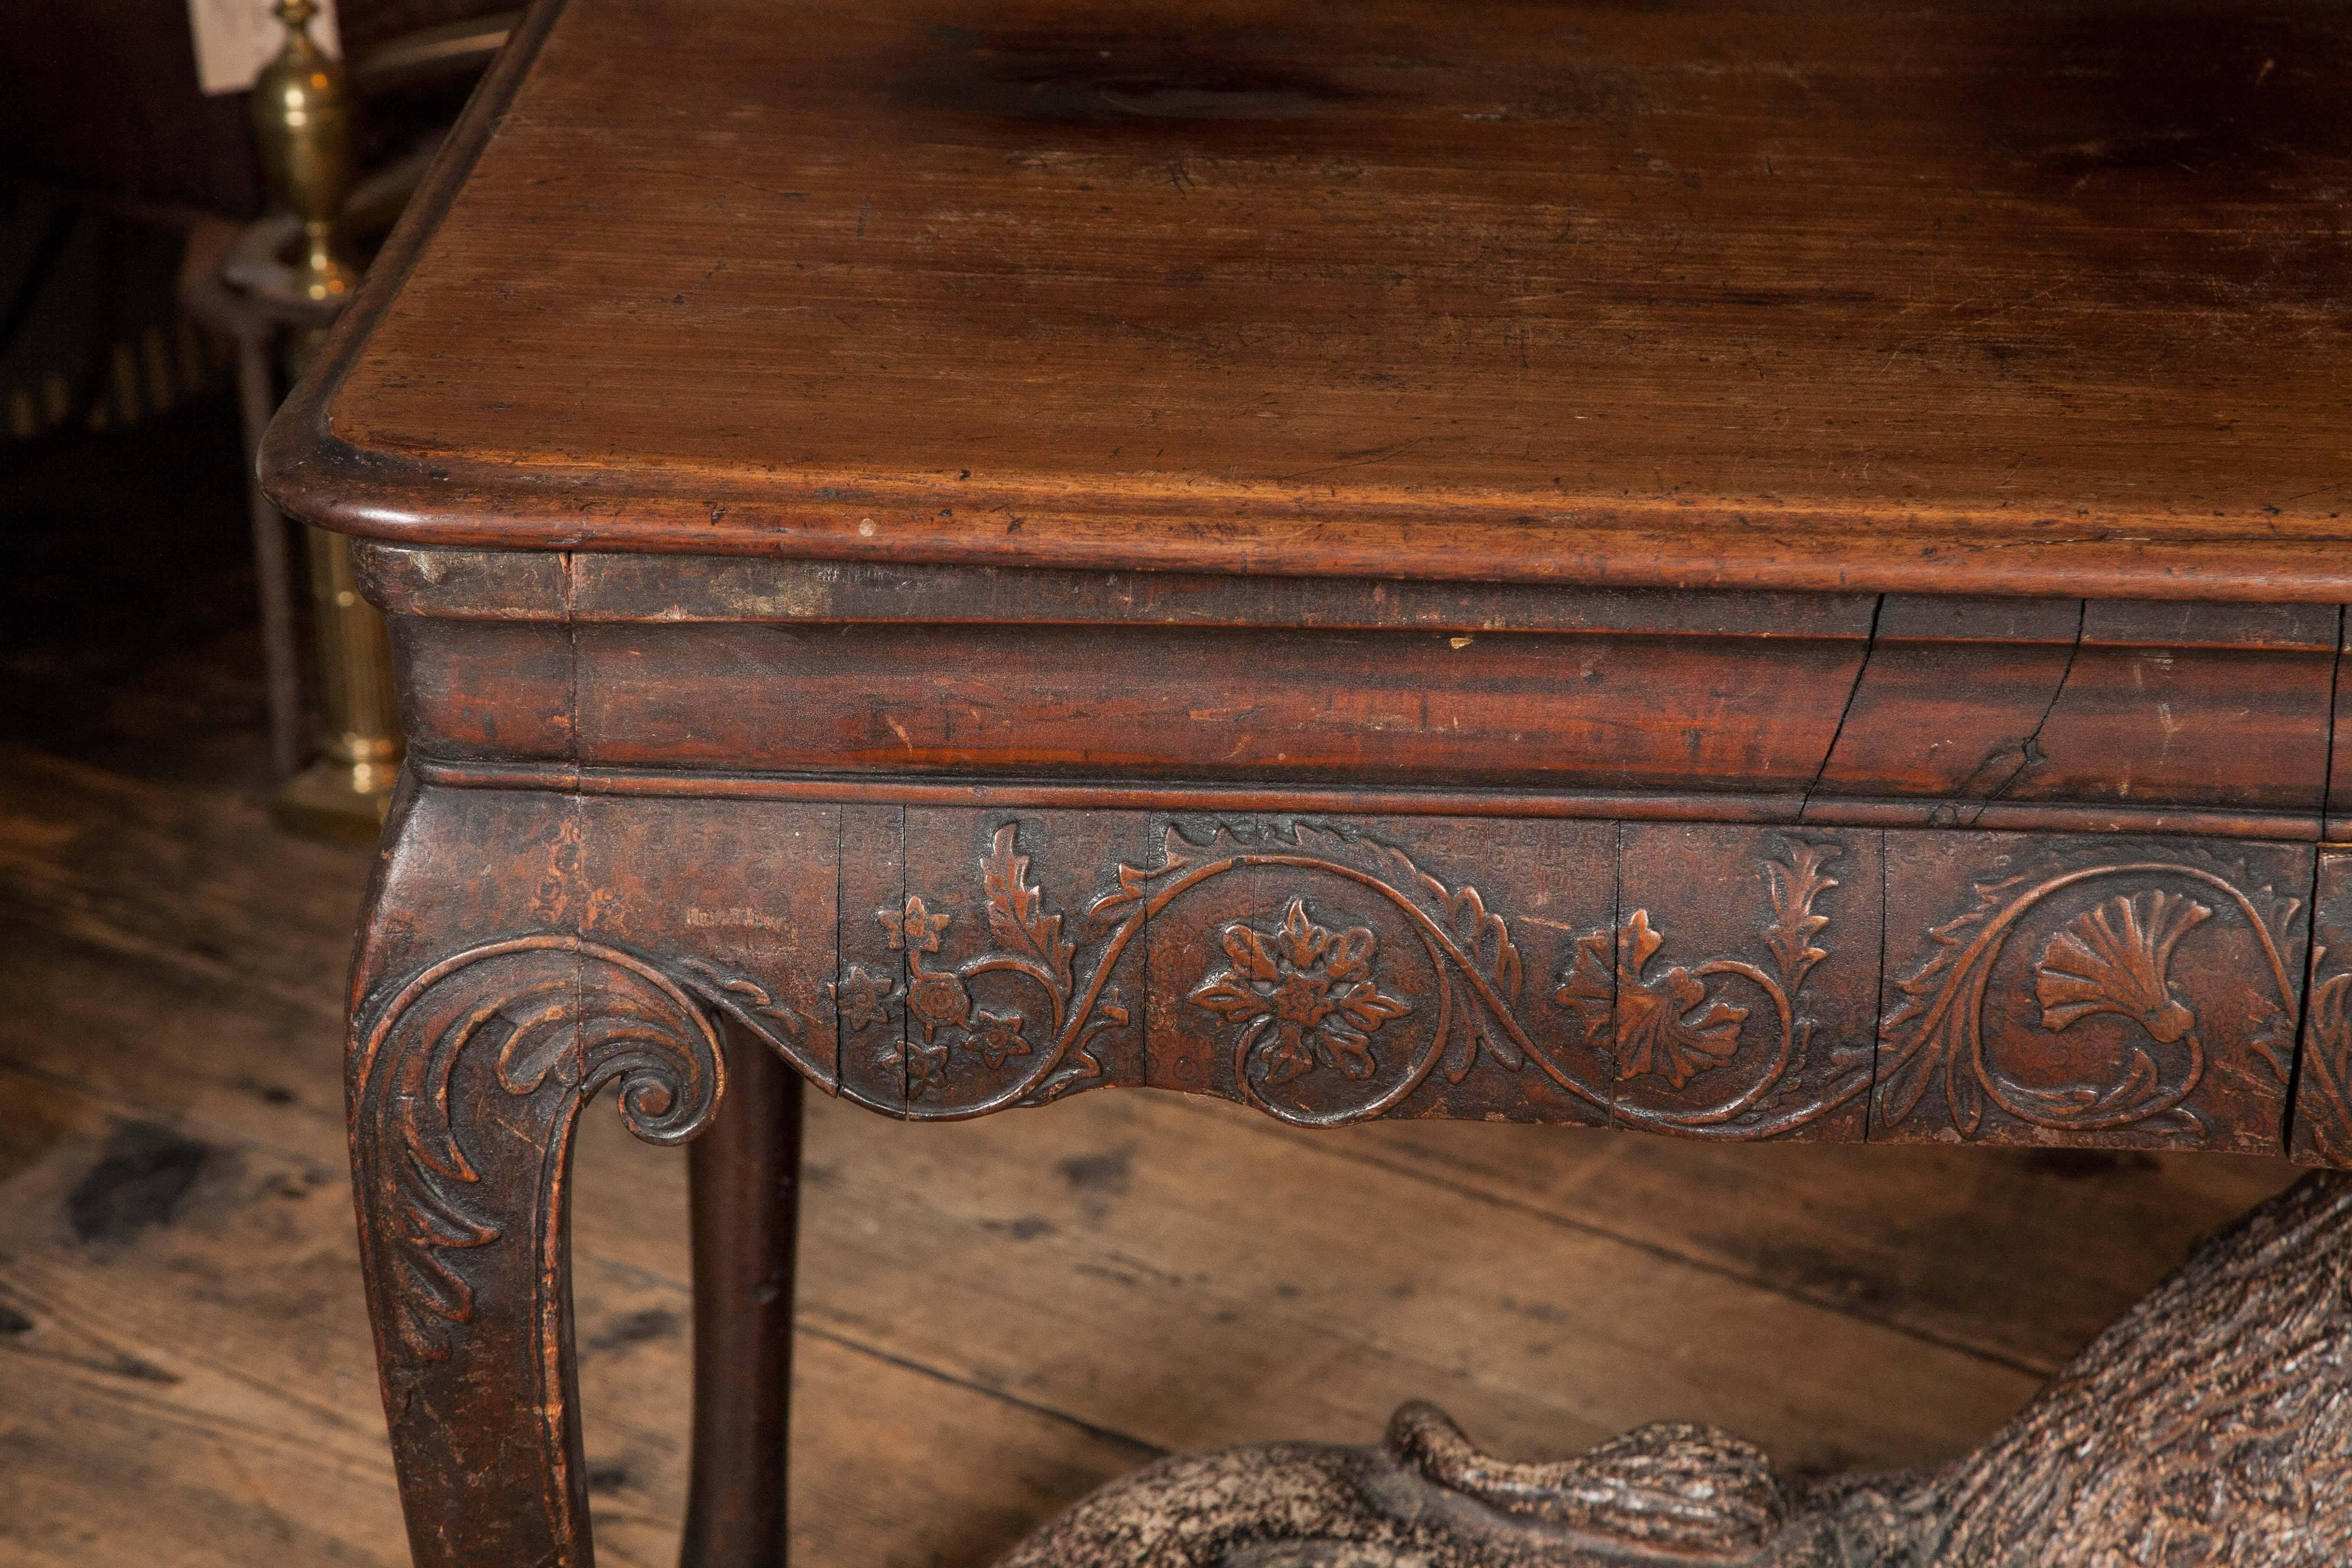 The unusual walnut top above a simple moulded frieze and an apron adorned with arabesque foliage, centred by a grotesque mask. The cabriole legs supported by paw feet. It is extremely unusual to find a table of this calibre manufactured in walnut.